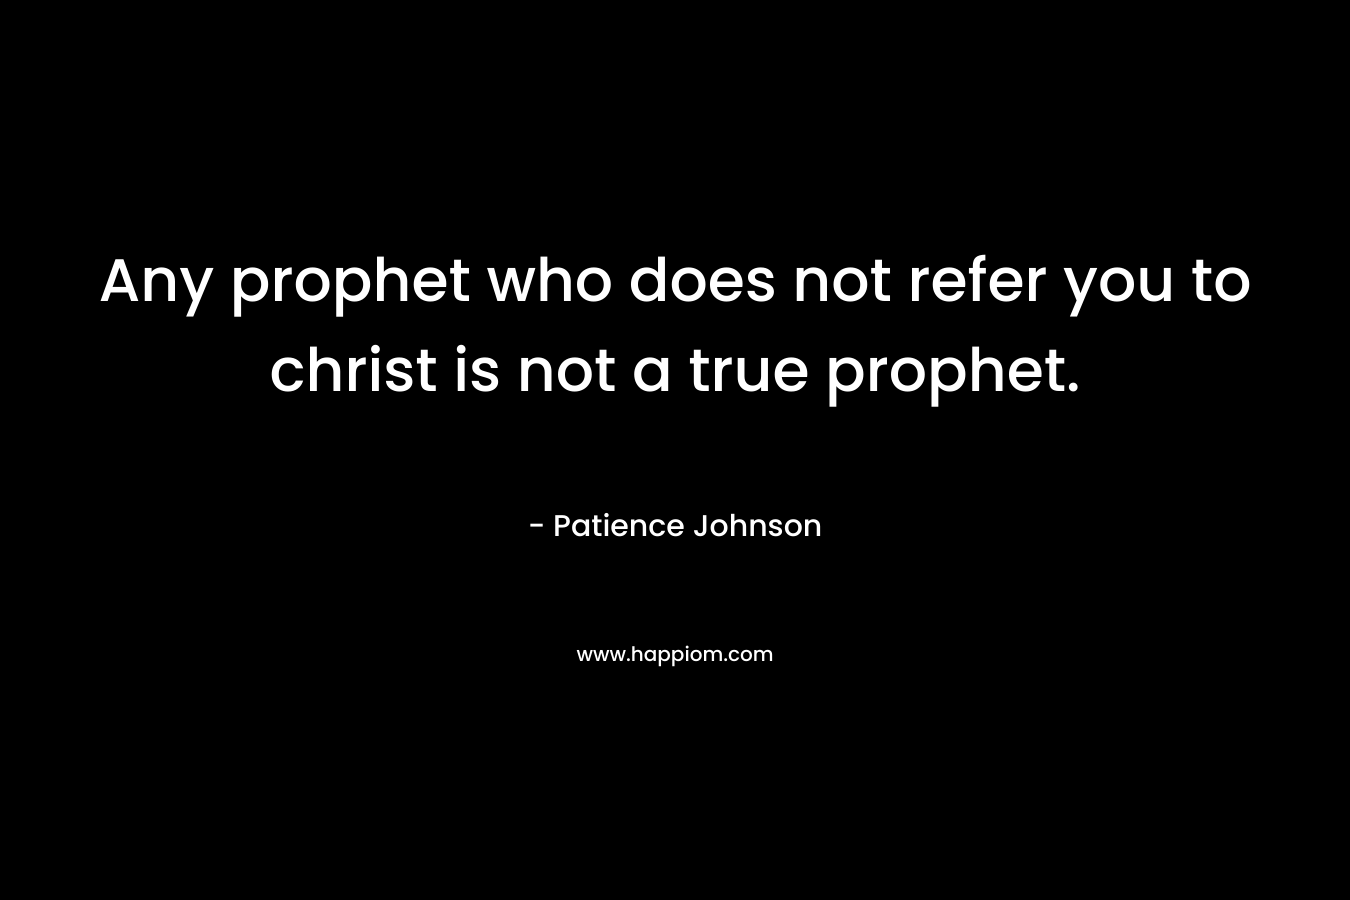 Any prophet who does not refer you to christ is not a true prophet.